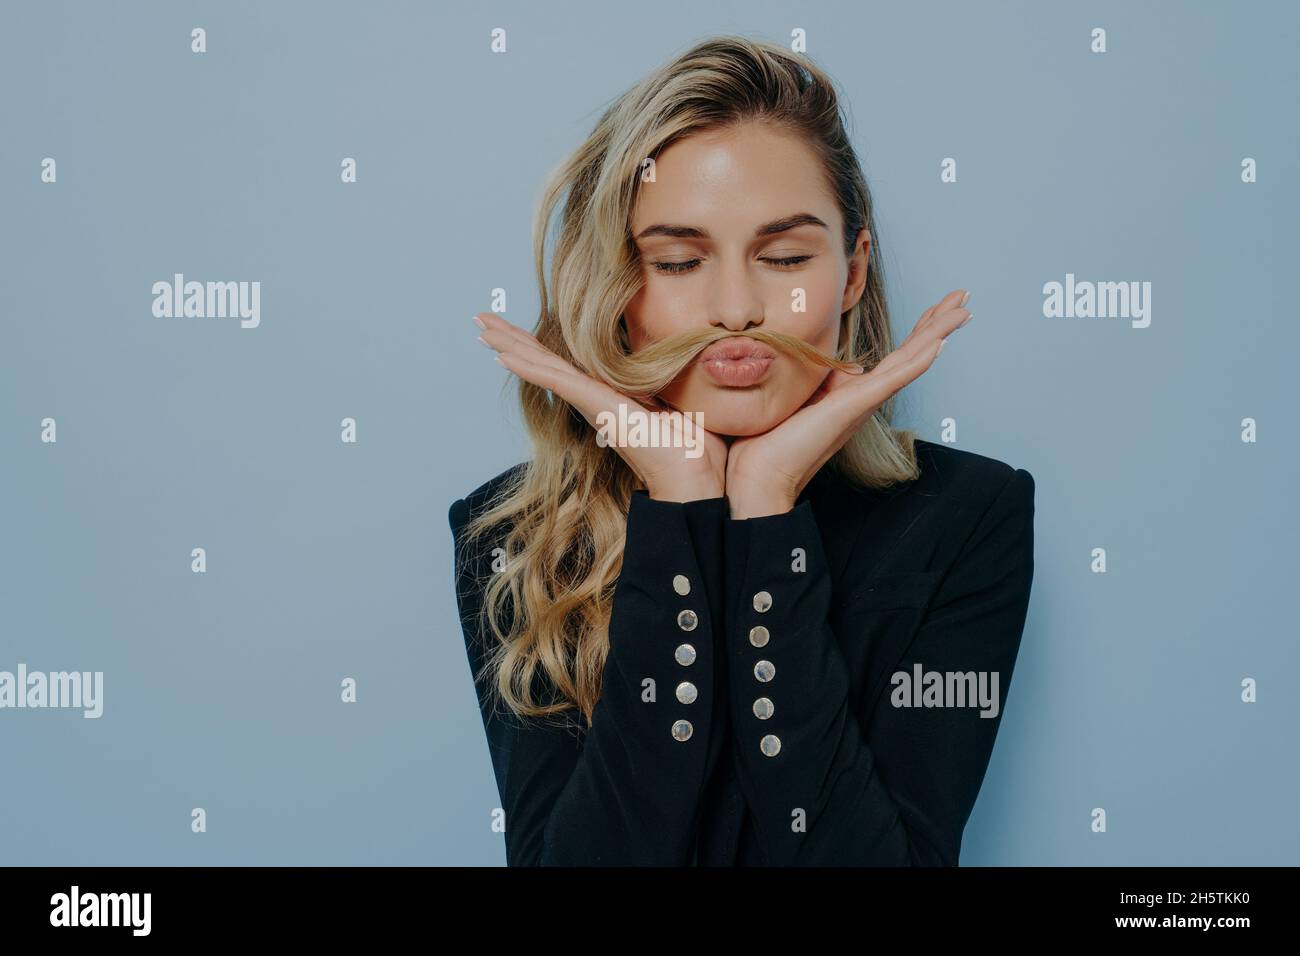 Crazy blonde woman having fun and fooling around Stock Photo